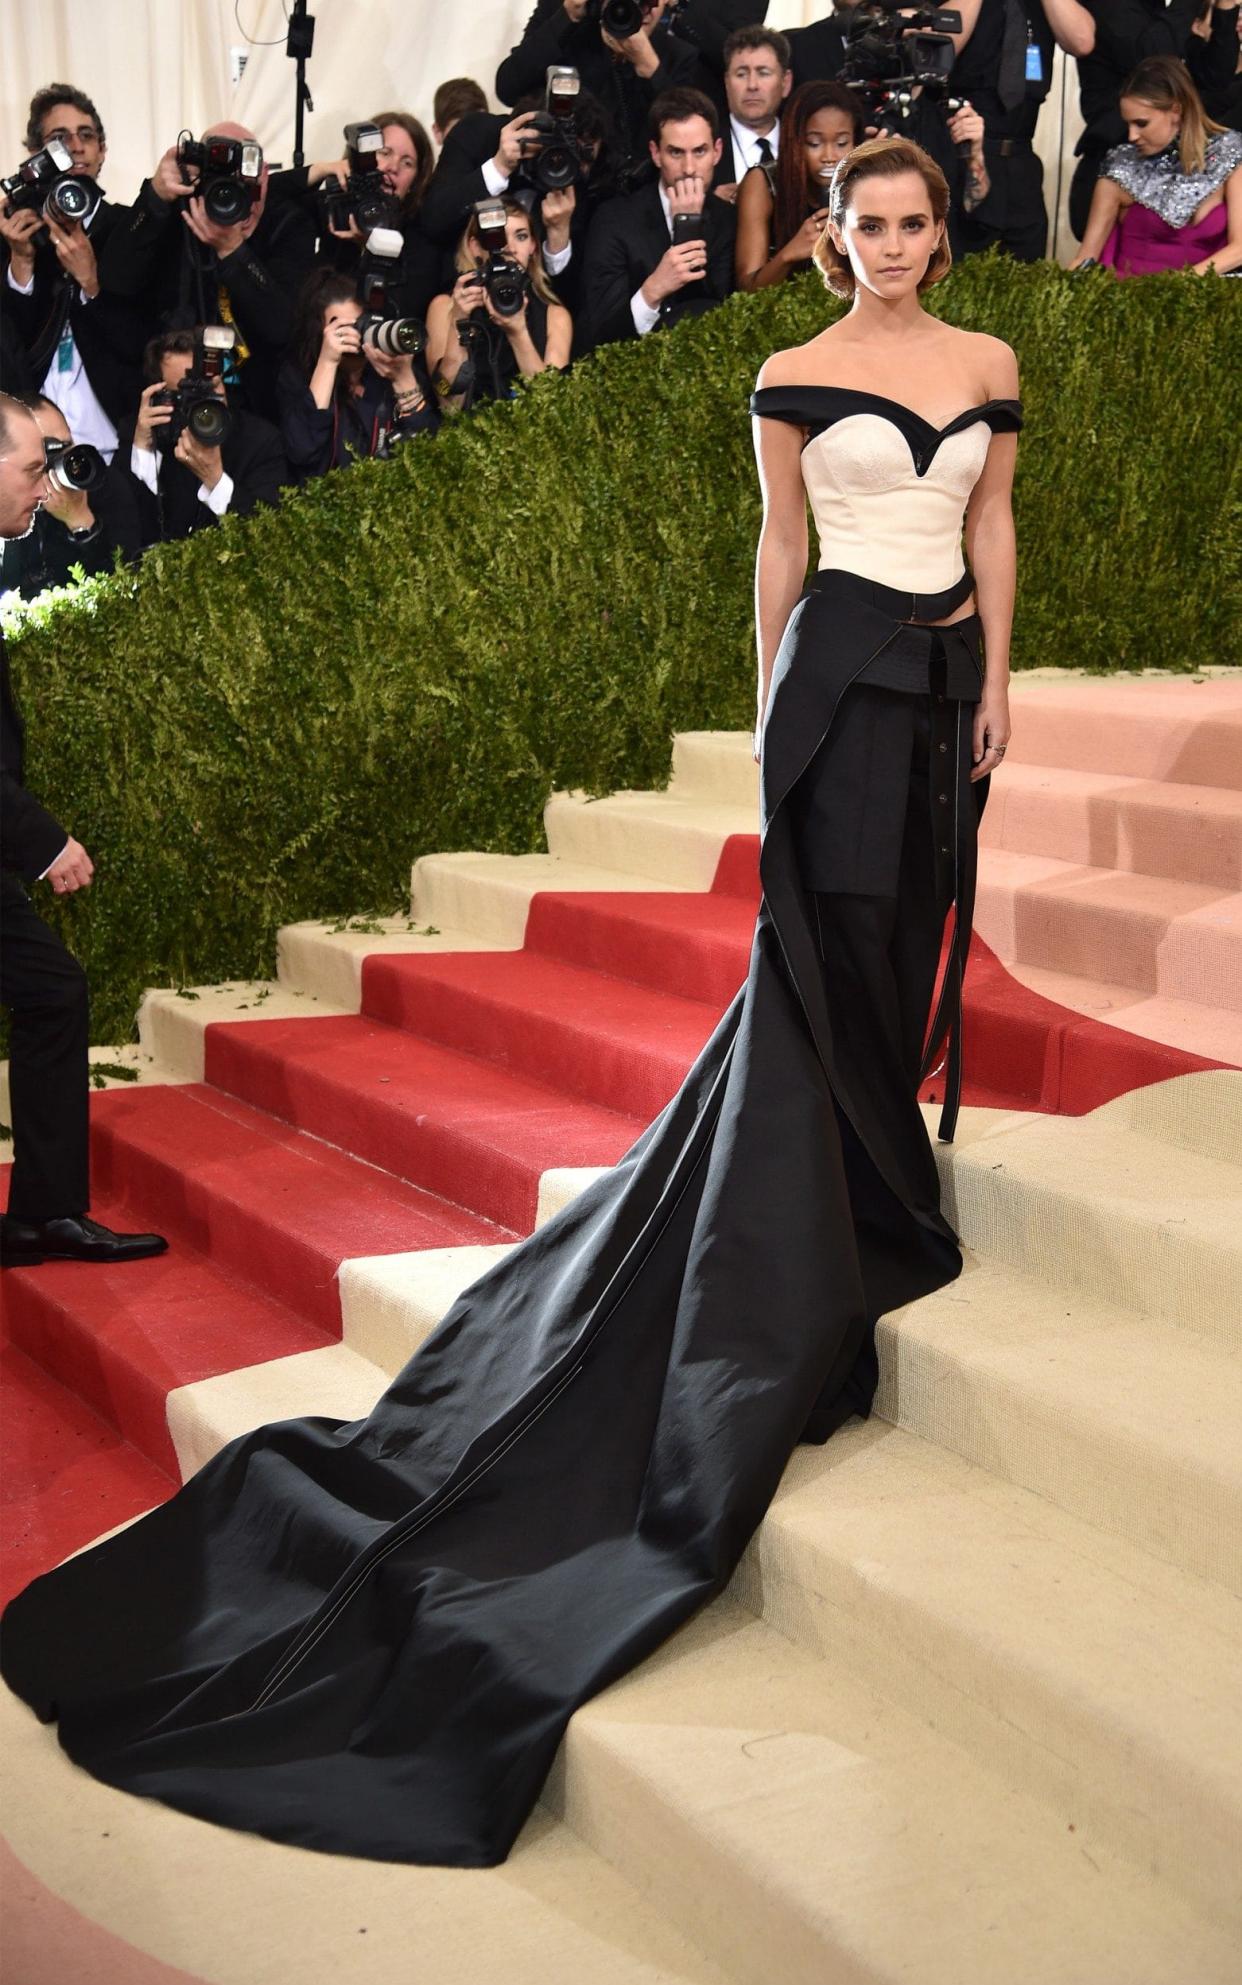 Emma Watson wearing a Calvin Klein gown made from recycled plastic bottles at the 2016 Met Gala - Getty Images North America